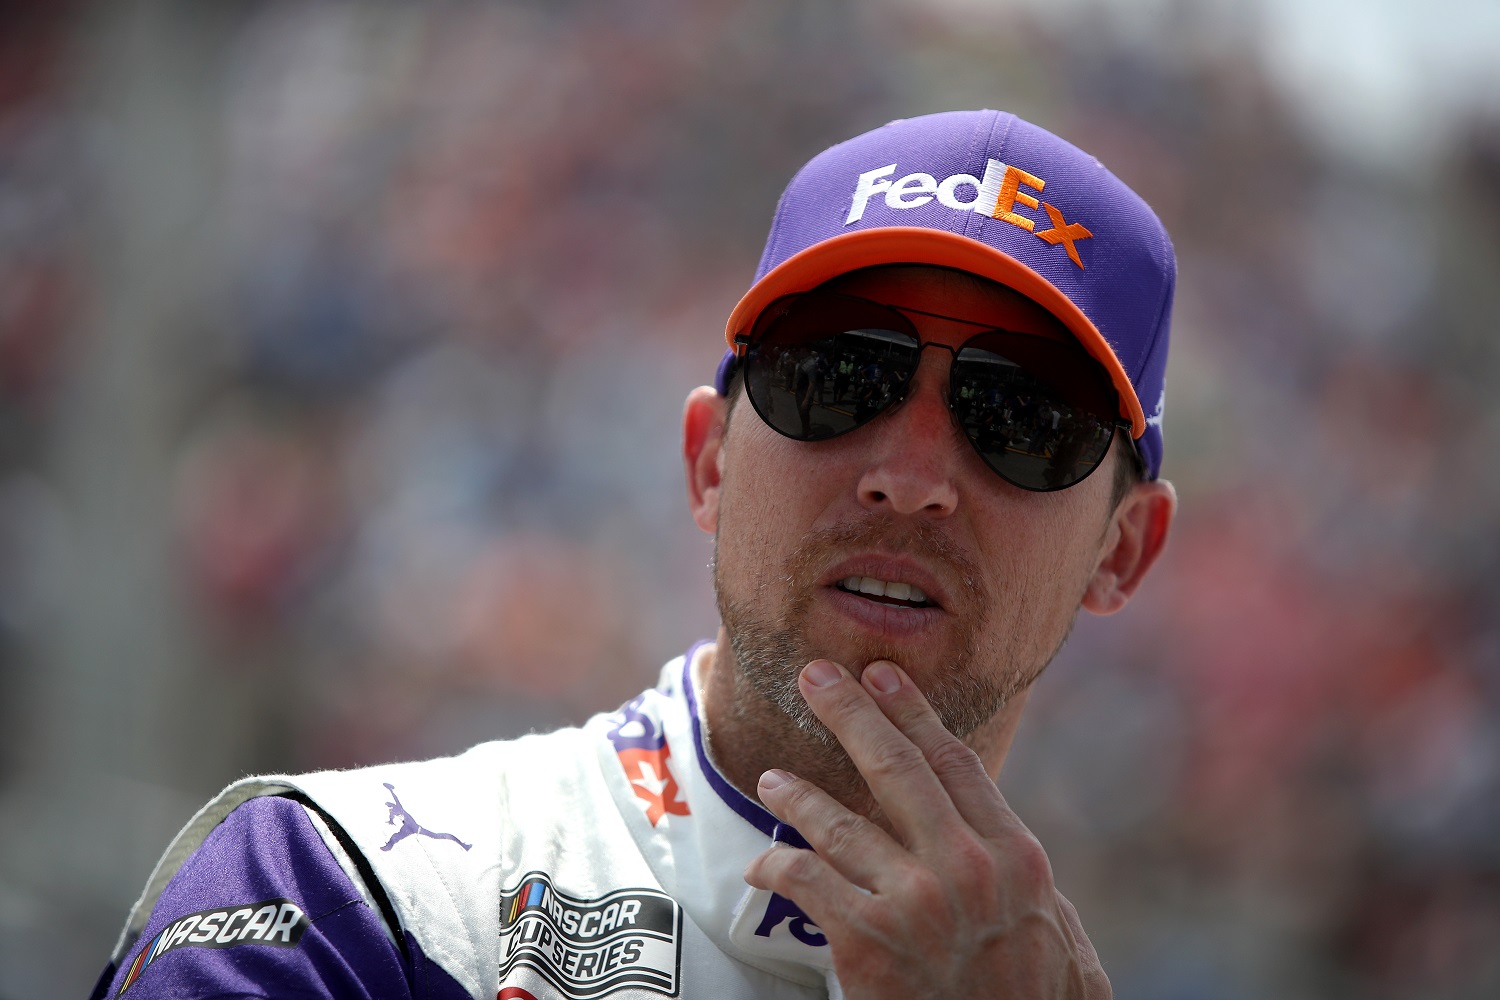 Denny Hamlin looks on during the NASCAR Cup Series Enjoy Illinois 300 at WWT Raceway on June 5, 2022 in Madison, Illinois. | Sean Gardner/Getty Images